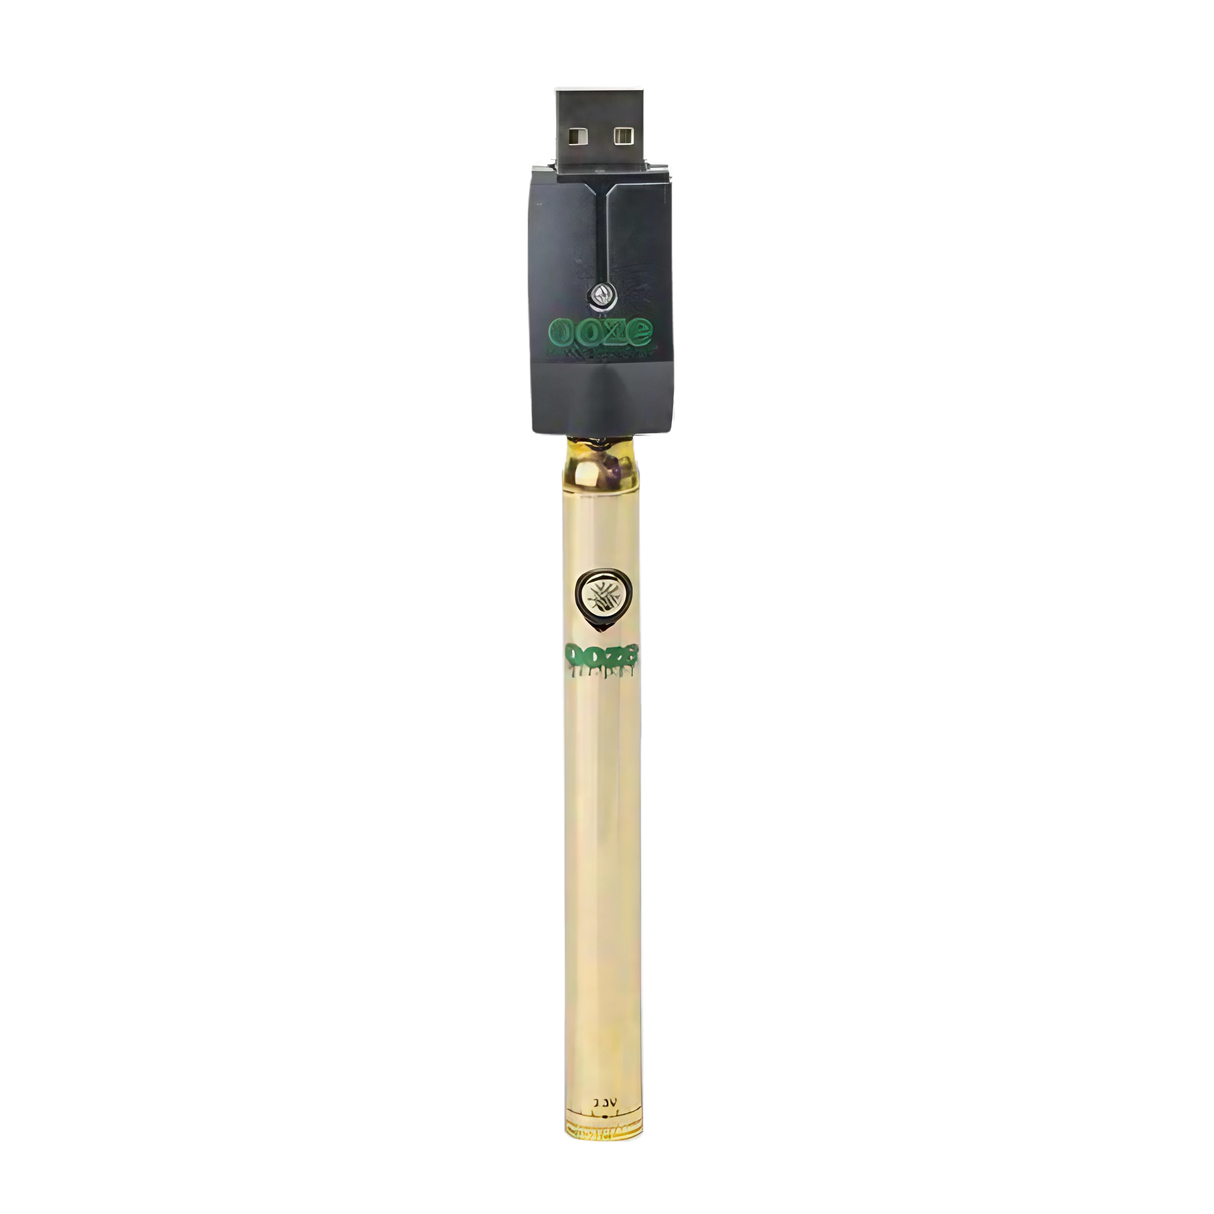 Ooze Slim Twist Battery in Gold with USB Charger, 510 Thread for Vaporizers, Front View